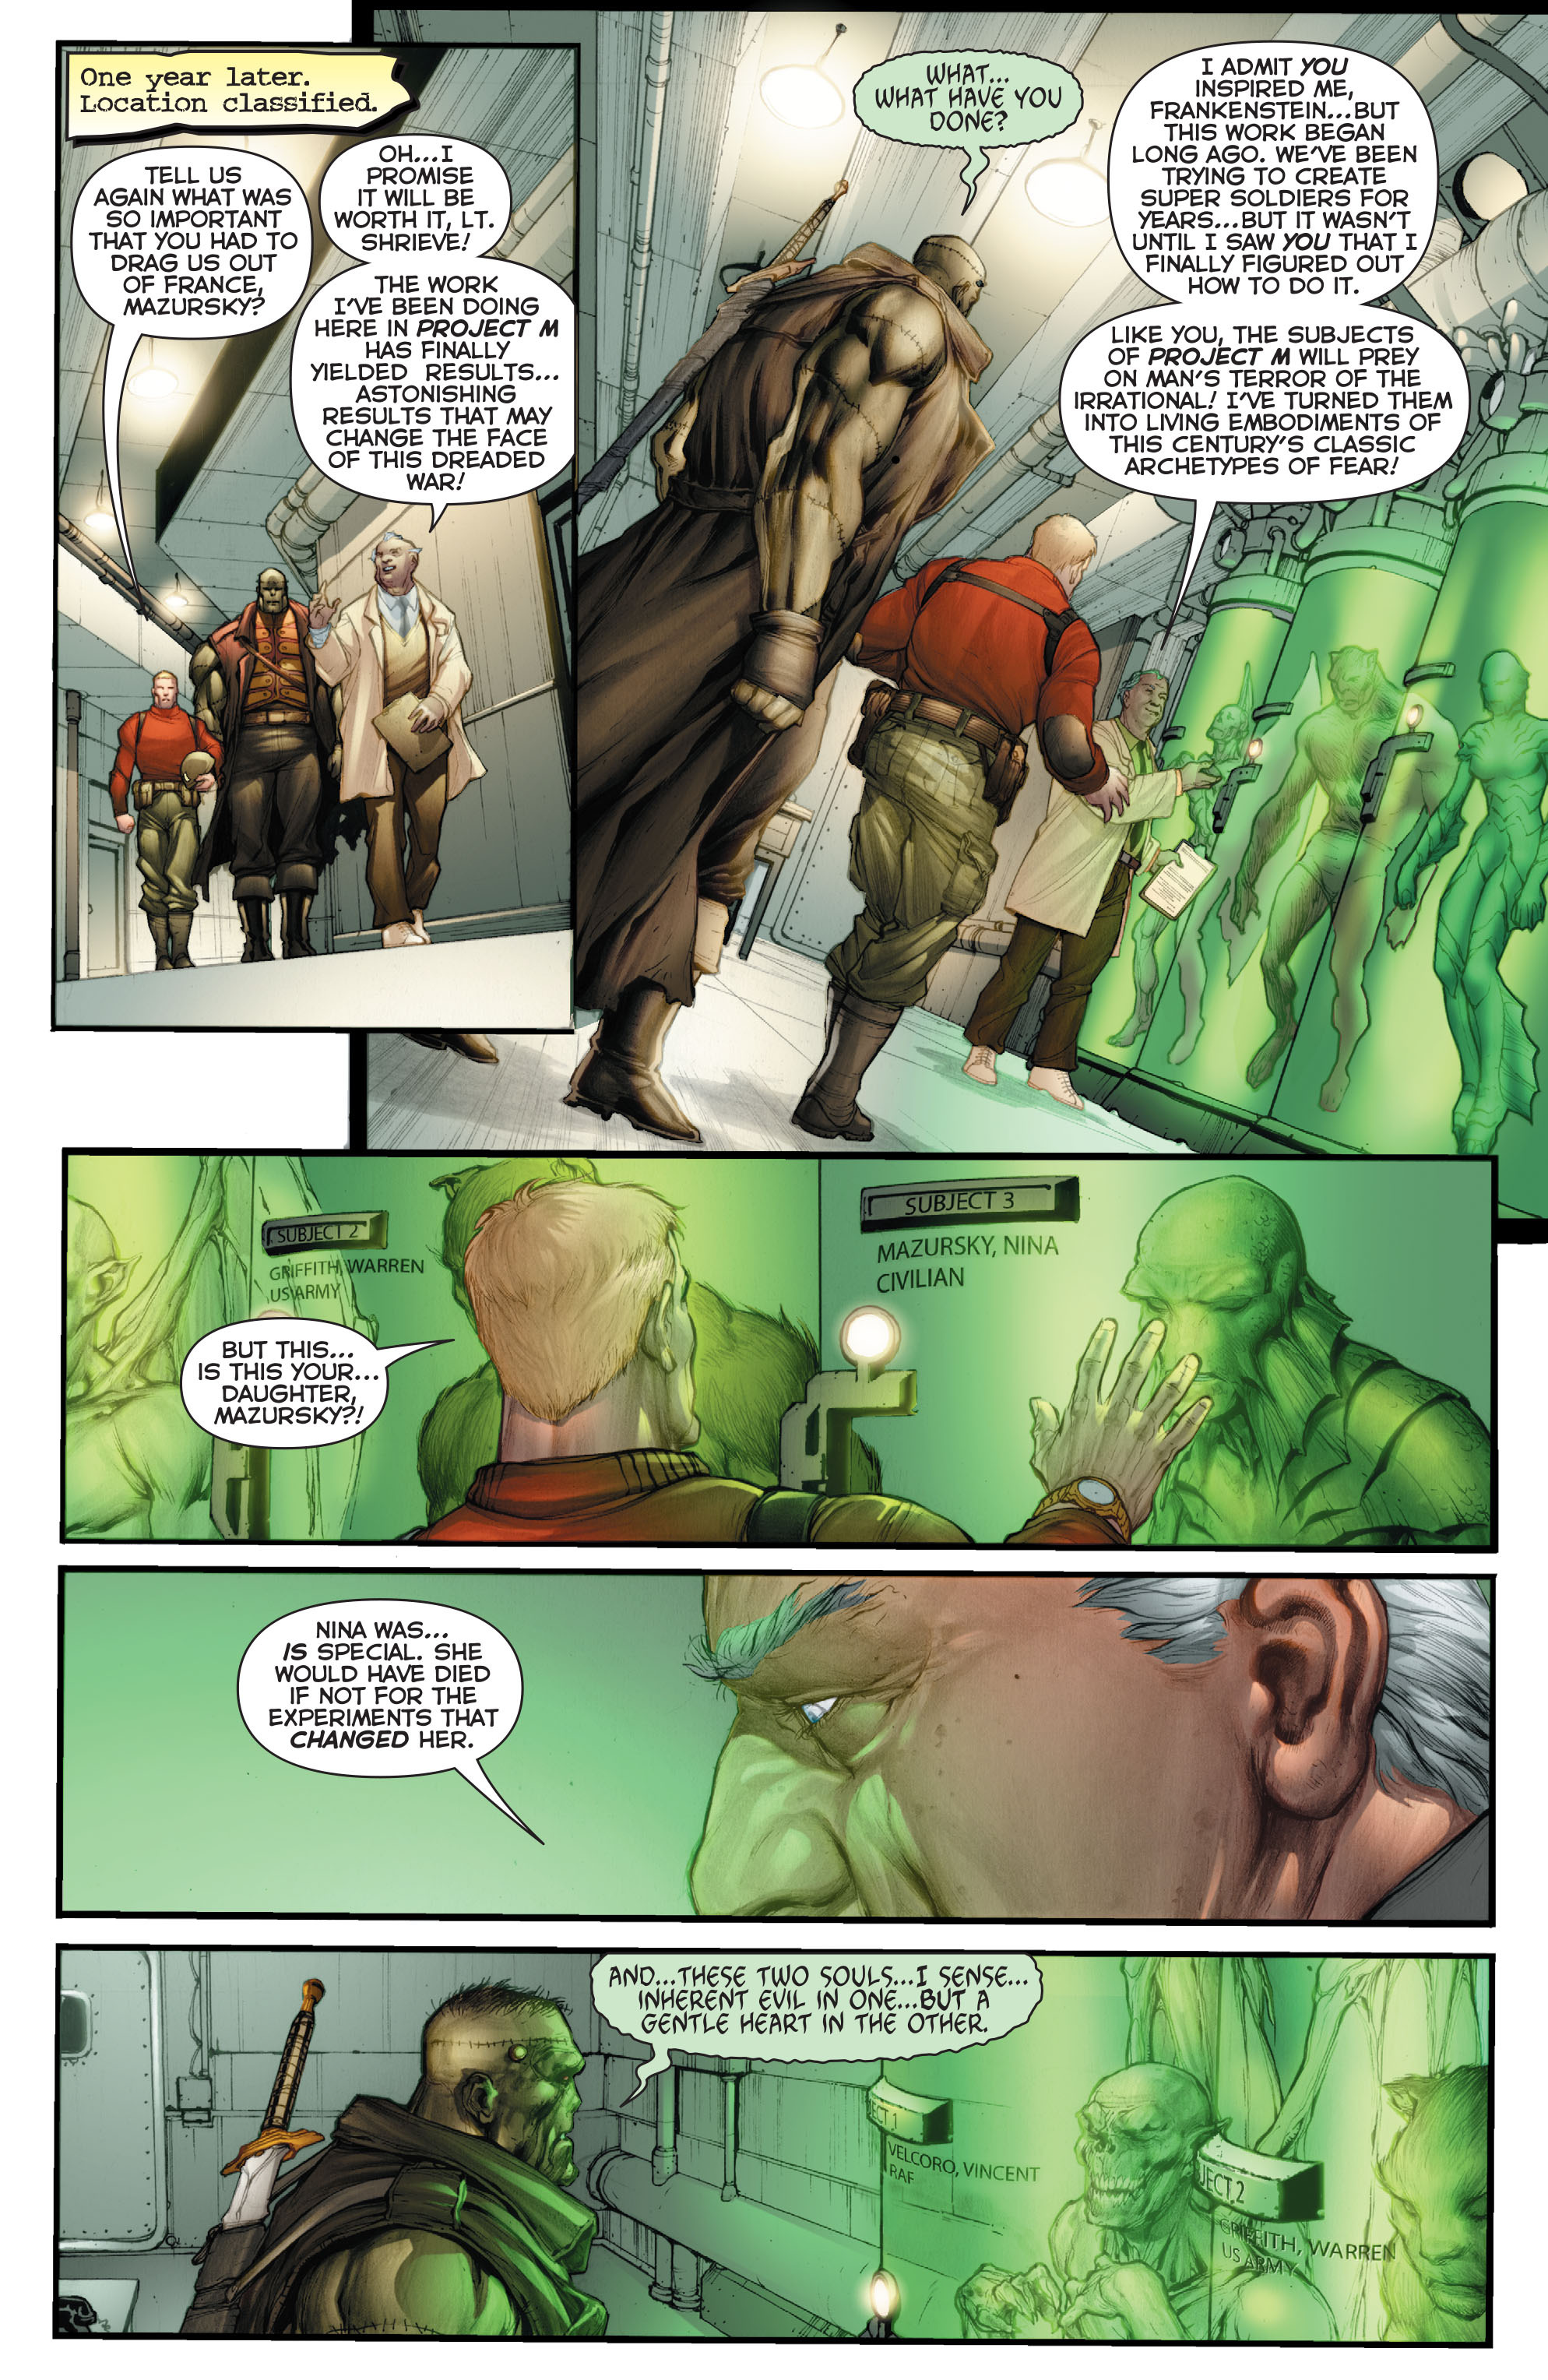 Flashpoint: The World of Flashpoint Featuring Green Lantern Full #1 - English 66